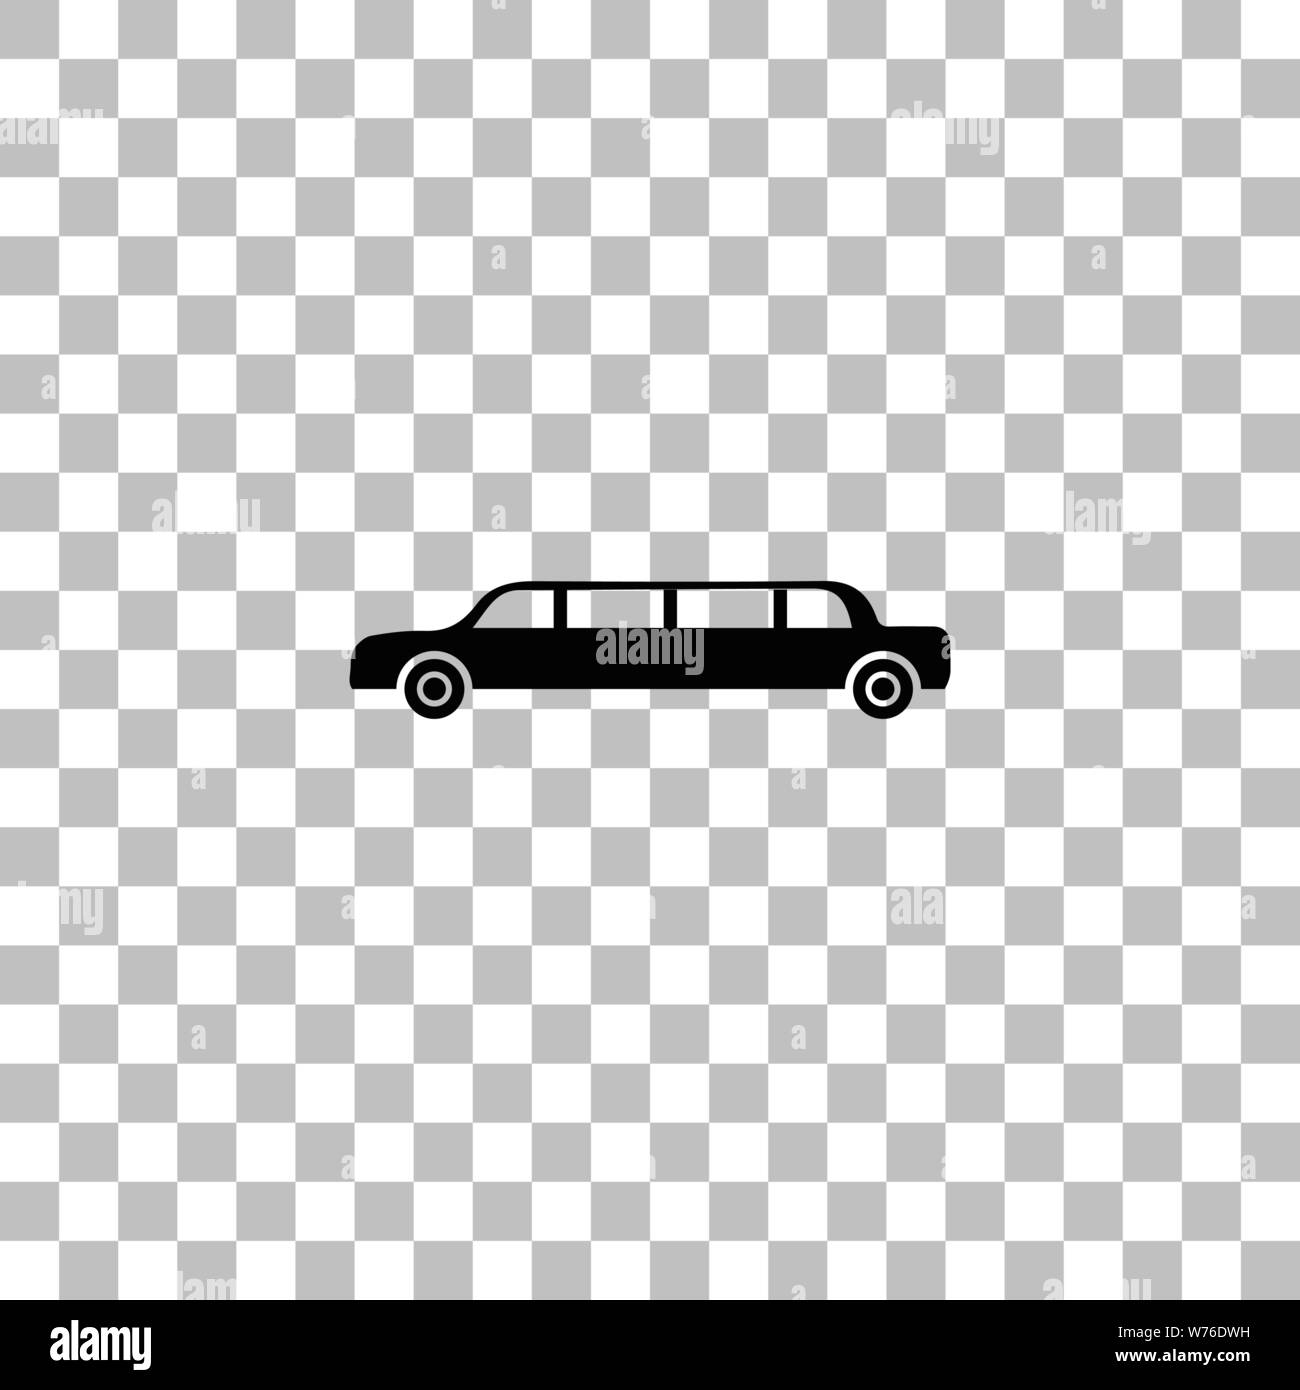 Limousine. Black flat icon on a transparent background. Pictogram for your project Stock Vector